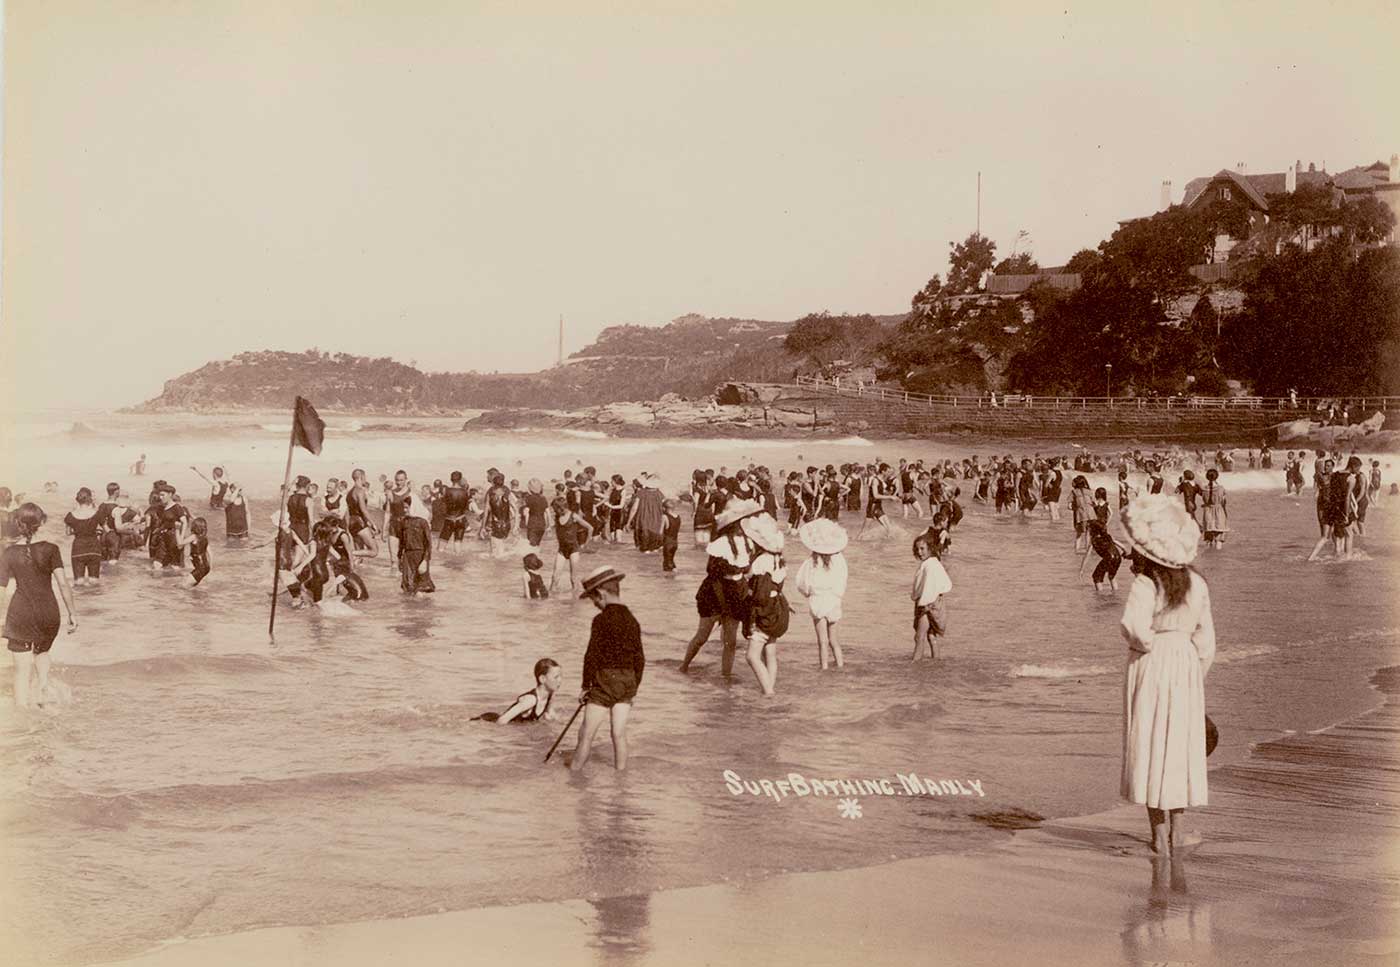 People bathing in the surf at Manly Beach, New South Wales, in the early 1900s.